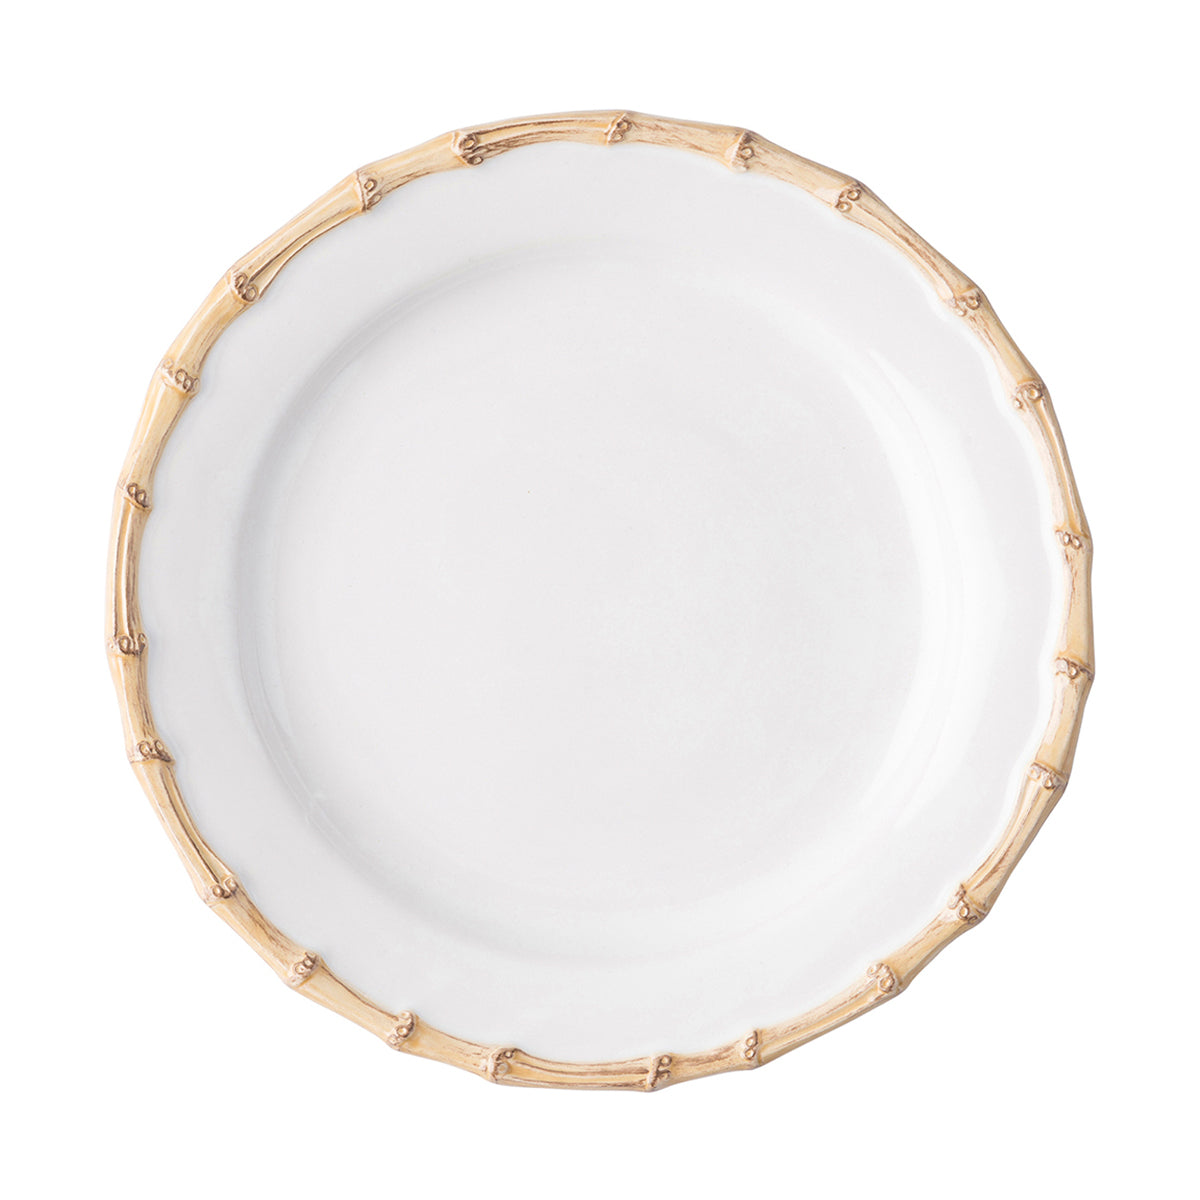 Bamboo Dinner Plate Set/4 - Natural | 2nd